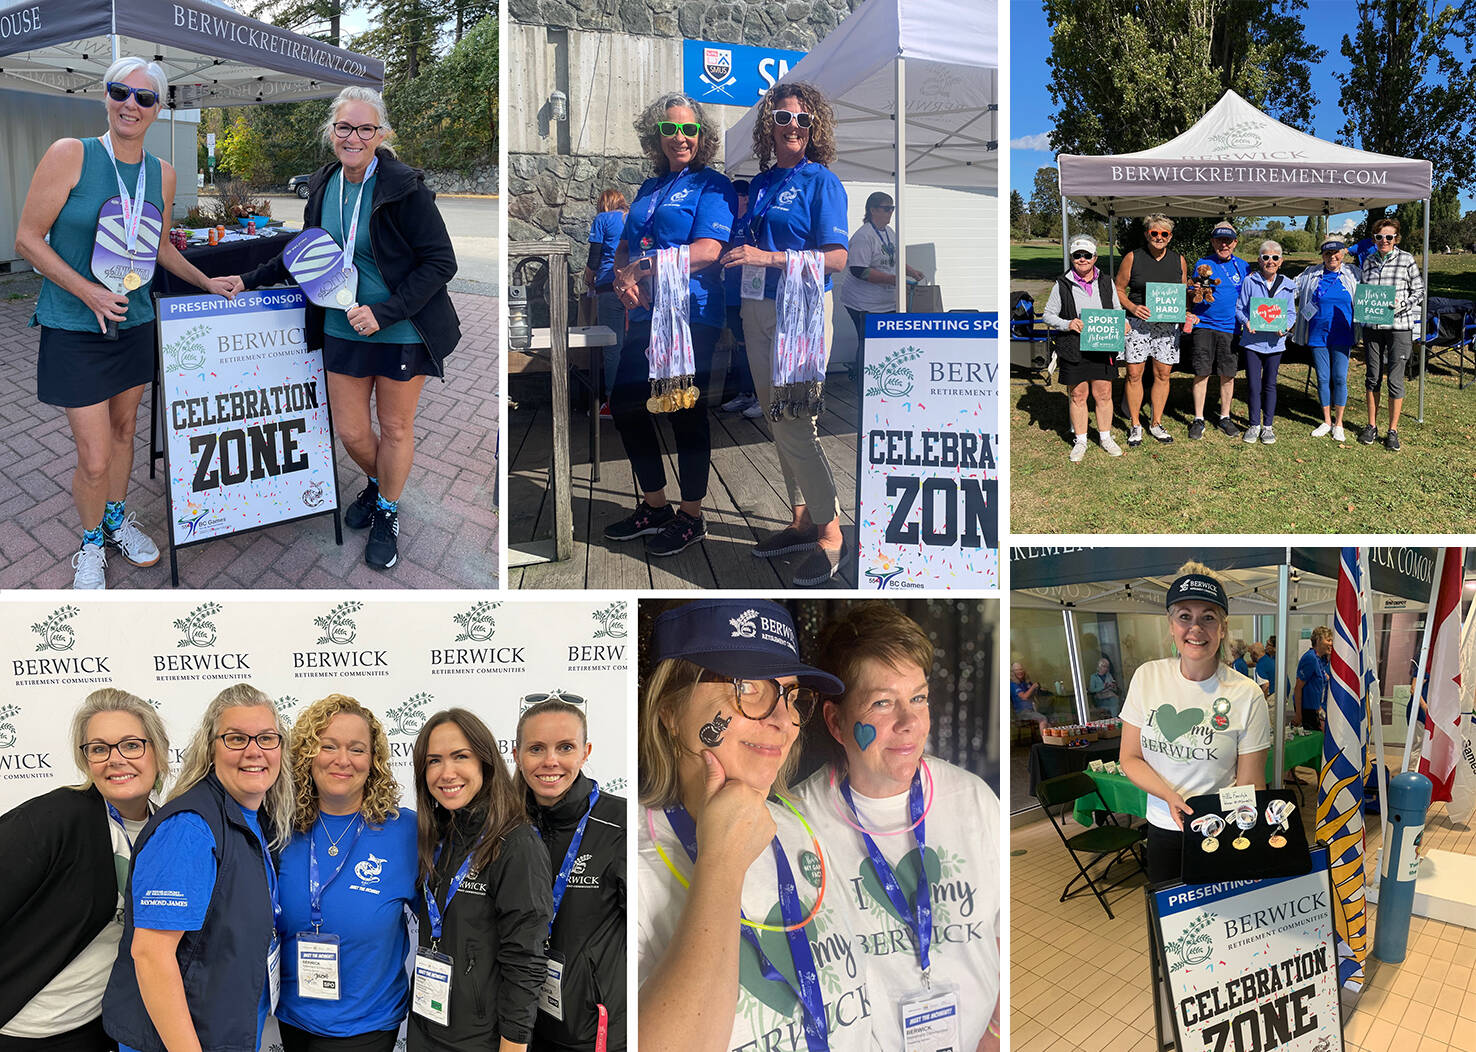 In addition to financial support, as 55+ BC Games title sponsor, Berwick provided a team of 30 volunteers (both residents and staff) which supported athletes and spectators throughout the games.